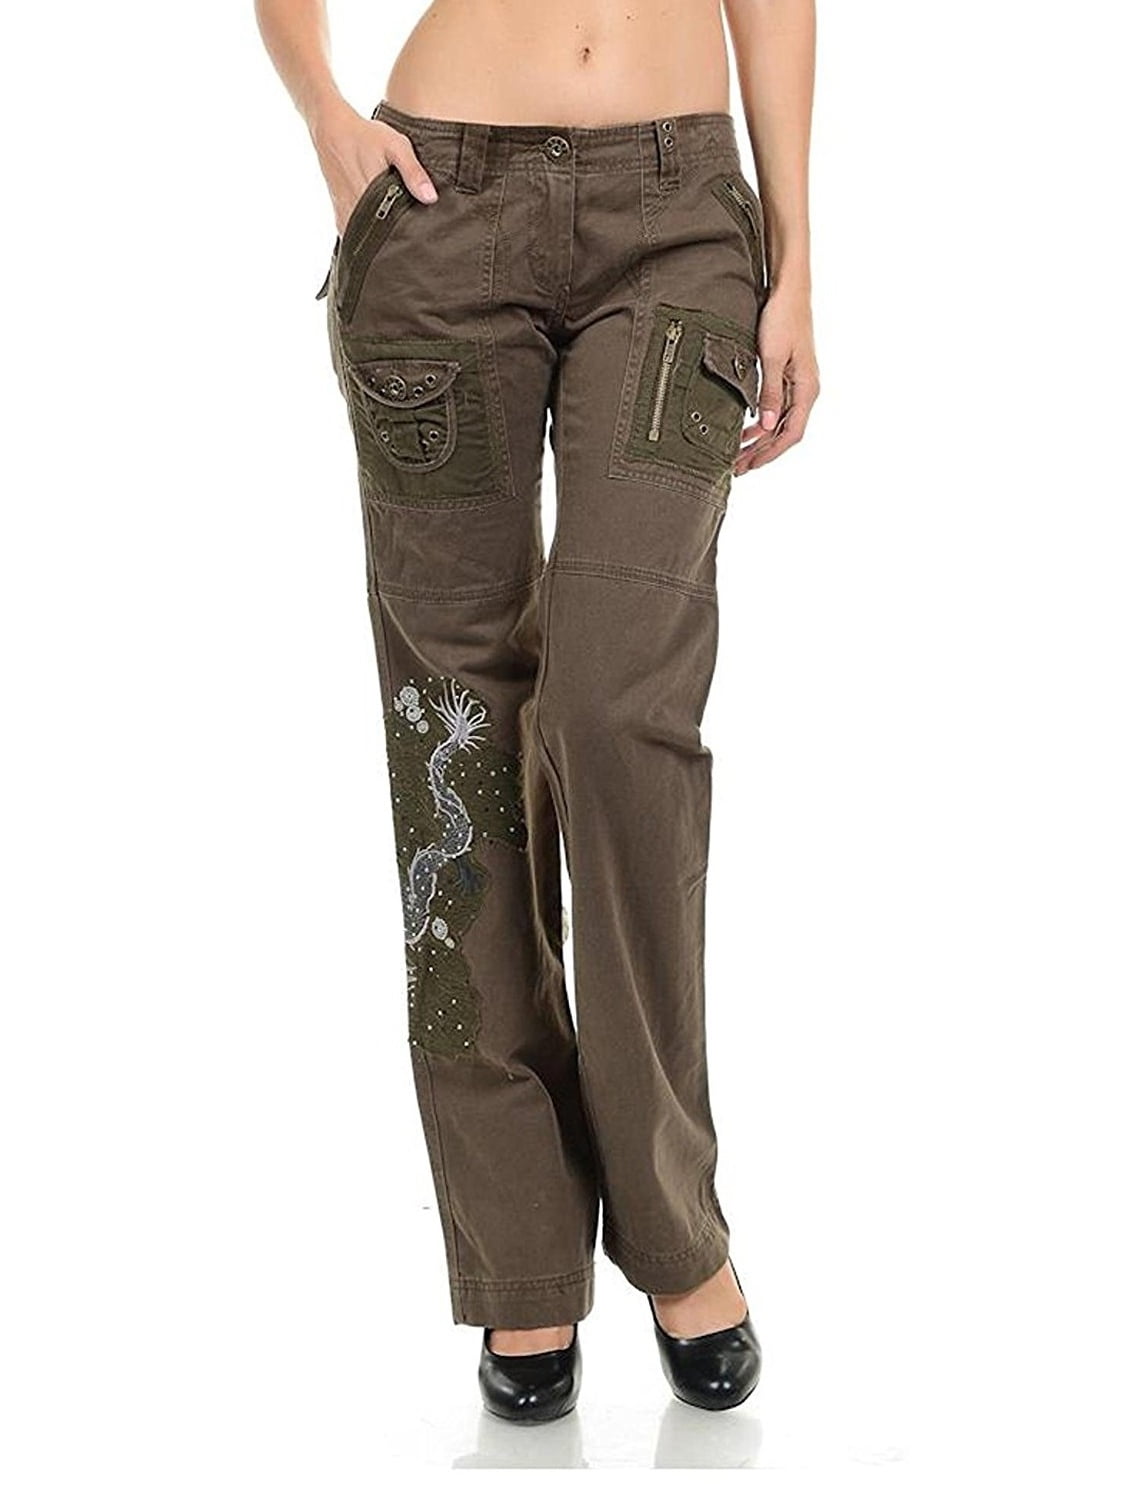 Ladies Womens Army Pockets Military Casual loose Cargo Outdoor Pants Trousers